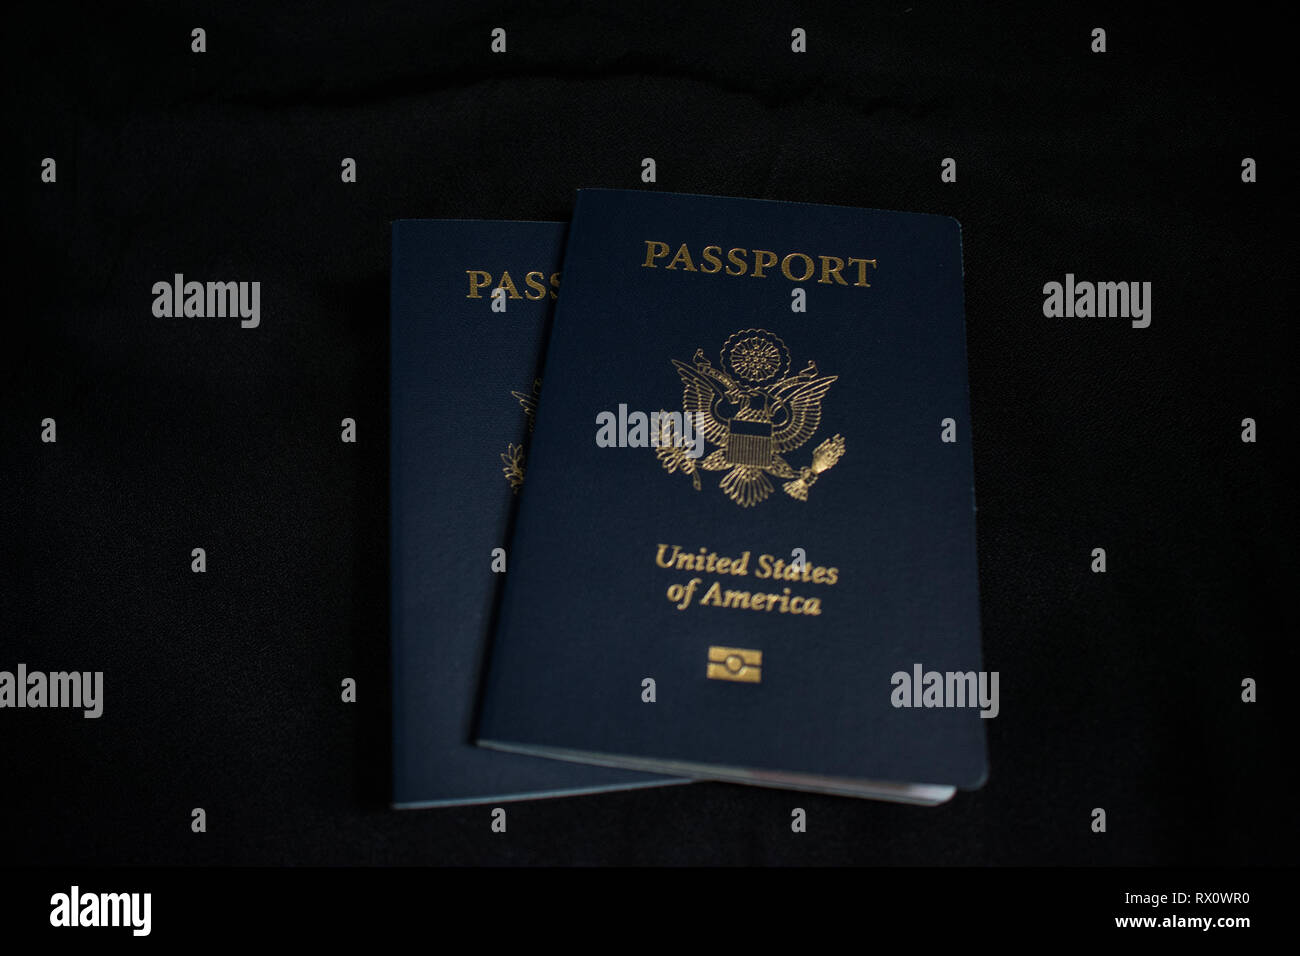 Two US passports centered on a black background Stock Photo